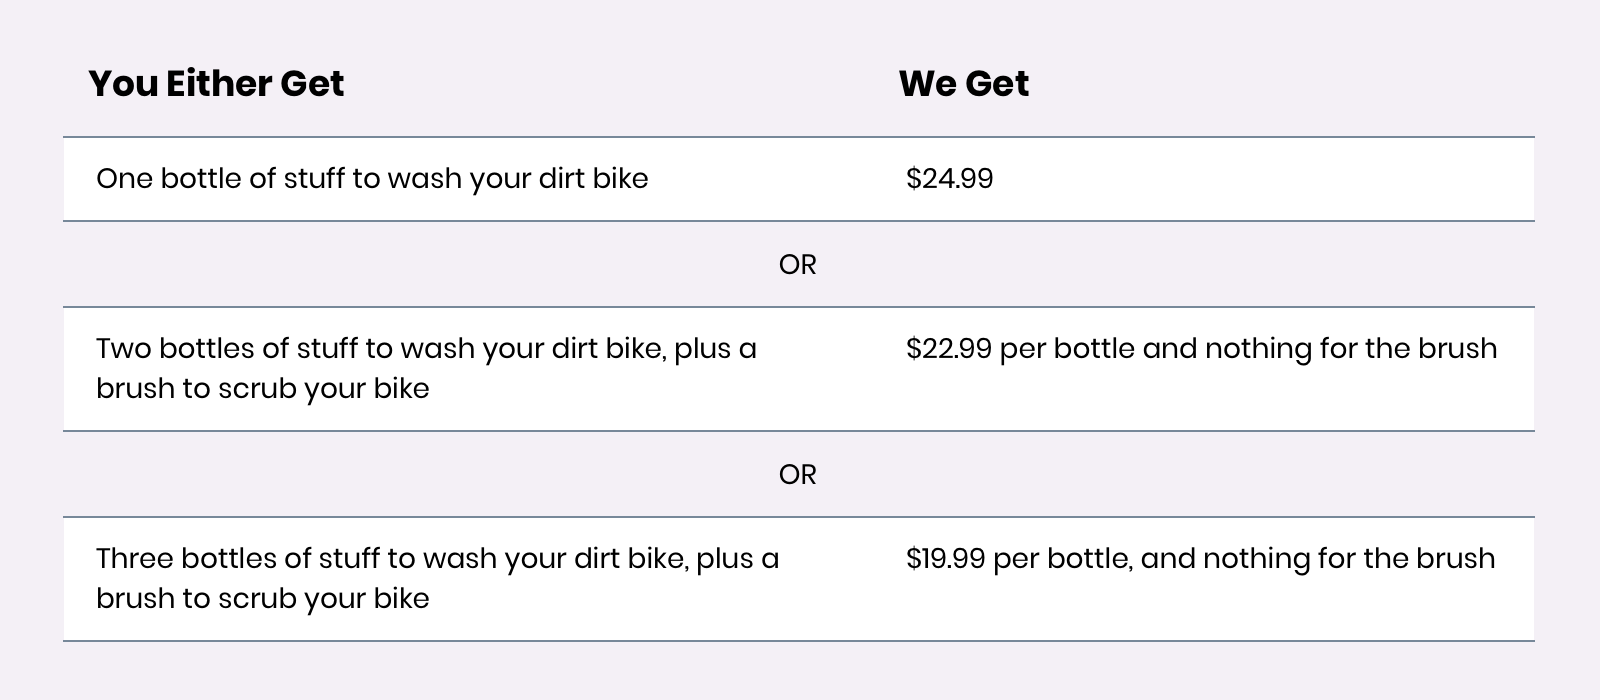 You either get: One bottle of stuff to wash your dirt bike. We get $24.99. - OR - You get: Two bottles of stuff to wash your dirt bike, plus a brush to scrub your bike. We get $22.99 per bottle and nothing for the brush. - OR - You get: Three bottles of stuff to wash your dirt bike, plus a brush to scrub your bike. We get $19.99 for the bottle, and nothing for the brush.